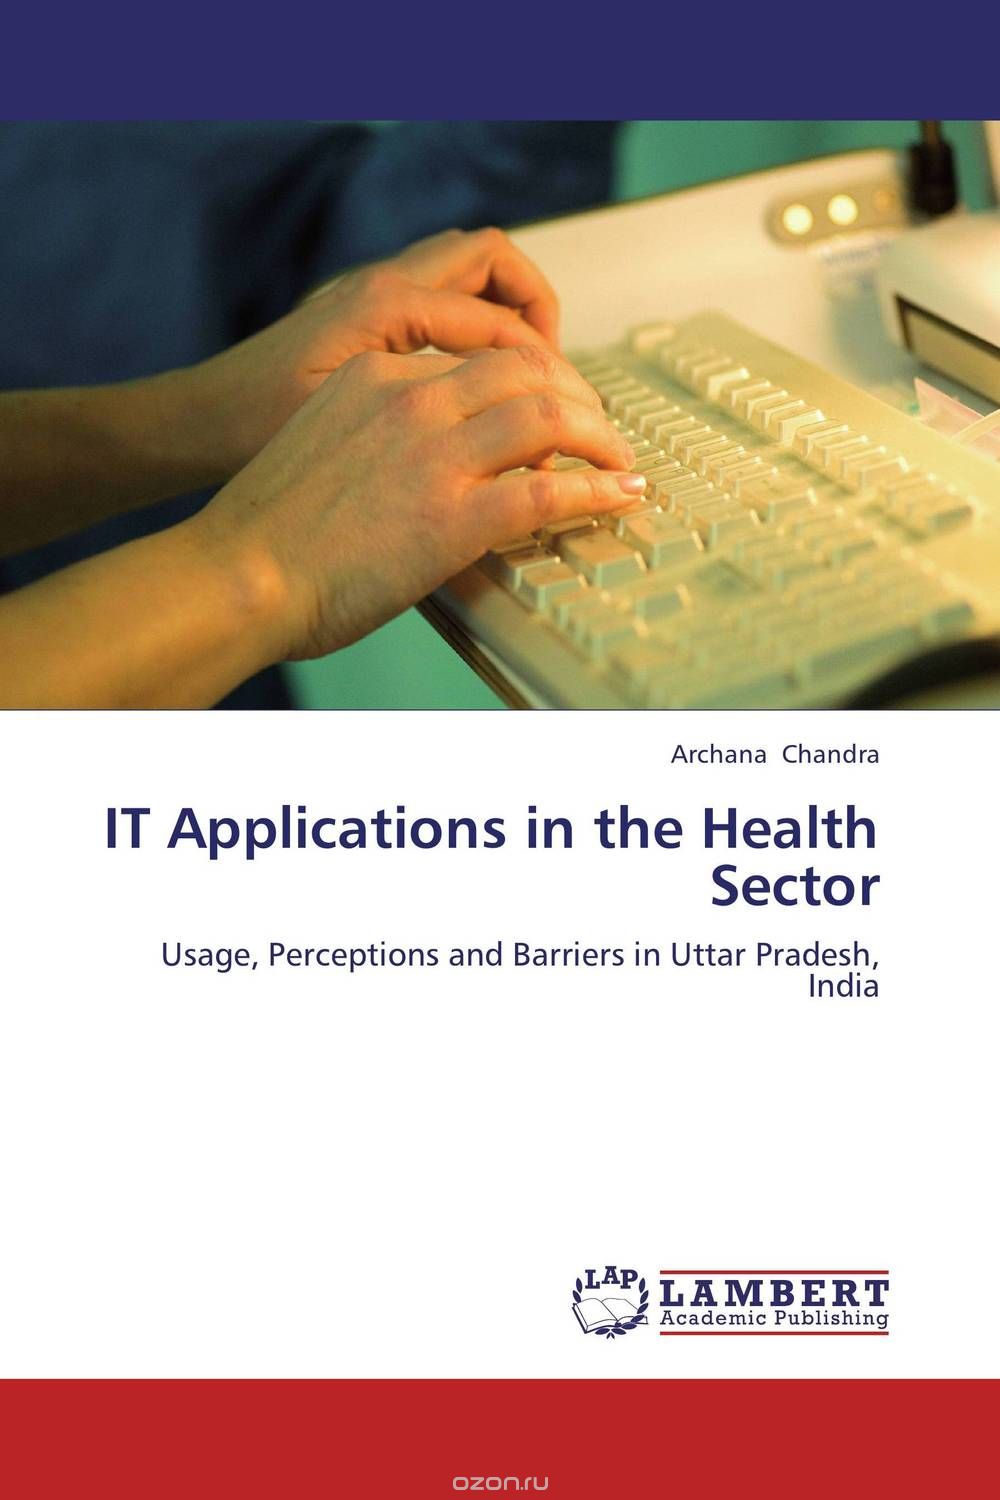 IT Applications in the Health Sector